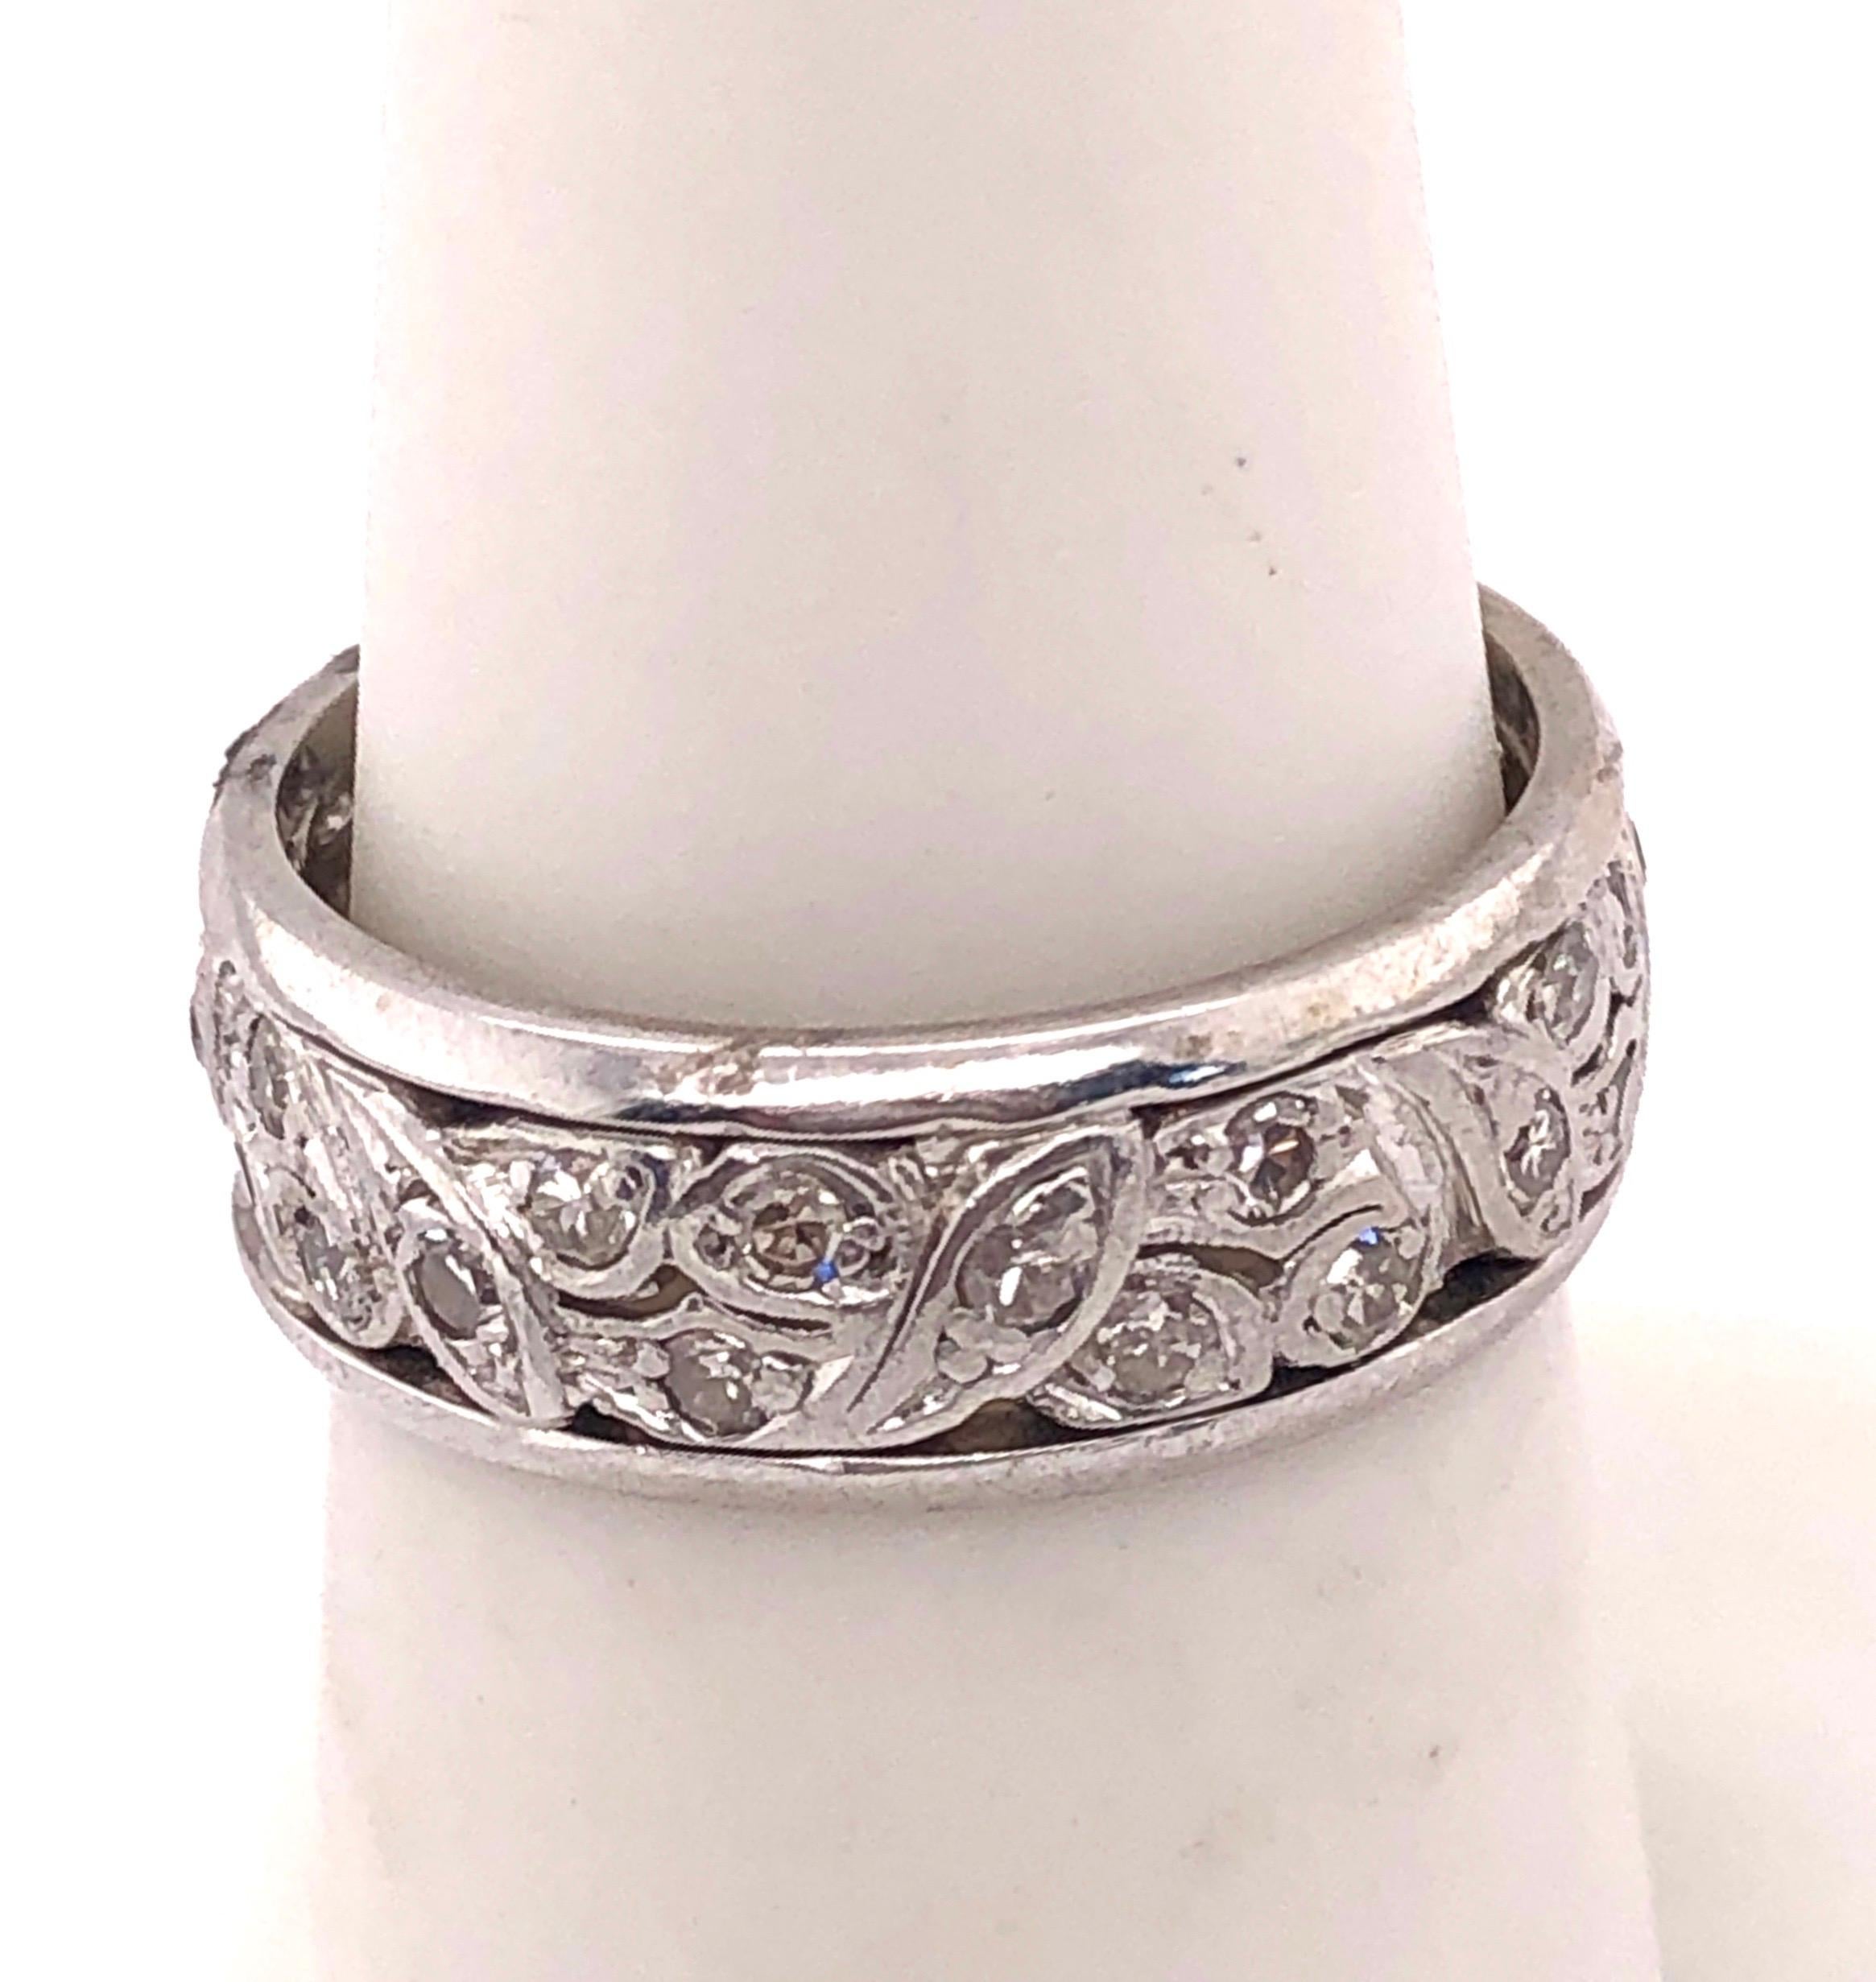 14 Karat White Gold Eternity Wedding Band or Fashion Ring 1 Carat TDW In Good Condition For Sale In Stamford, CT